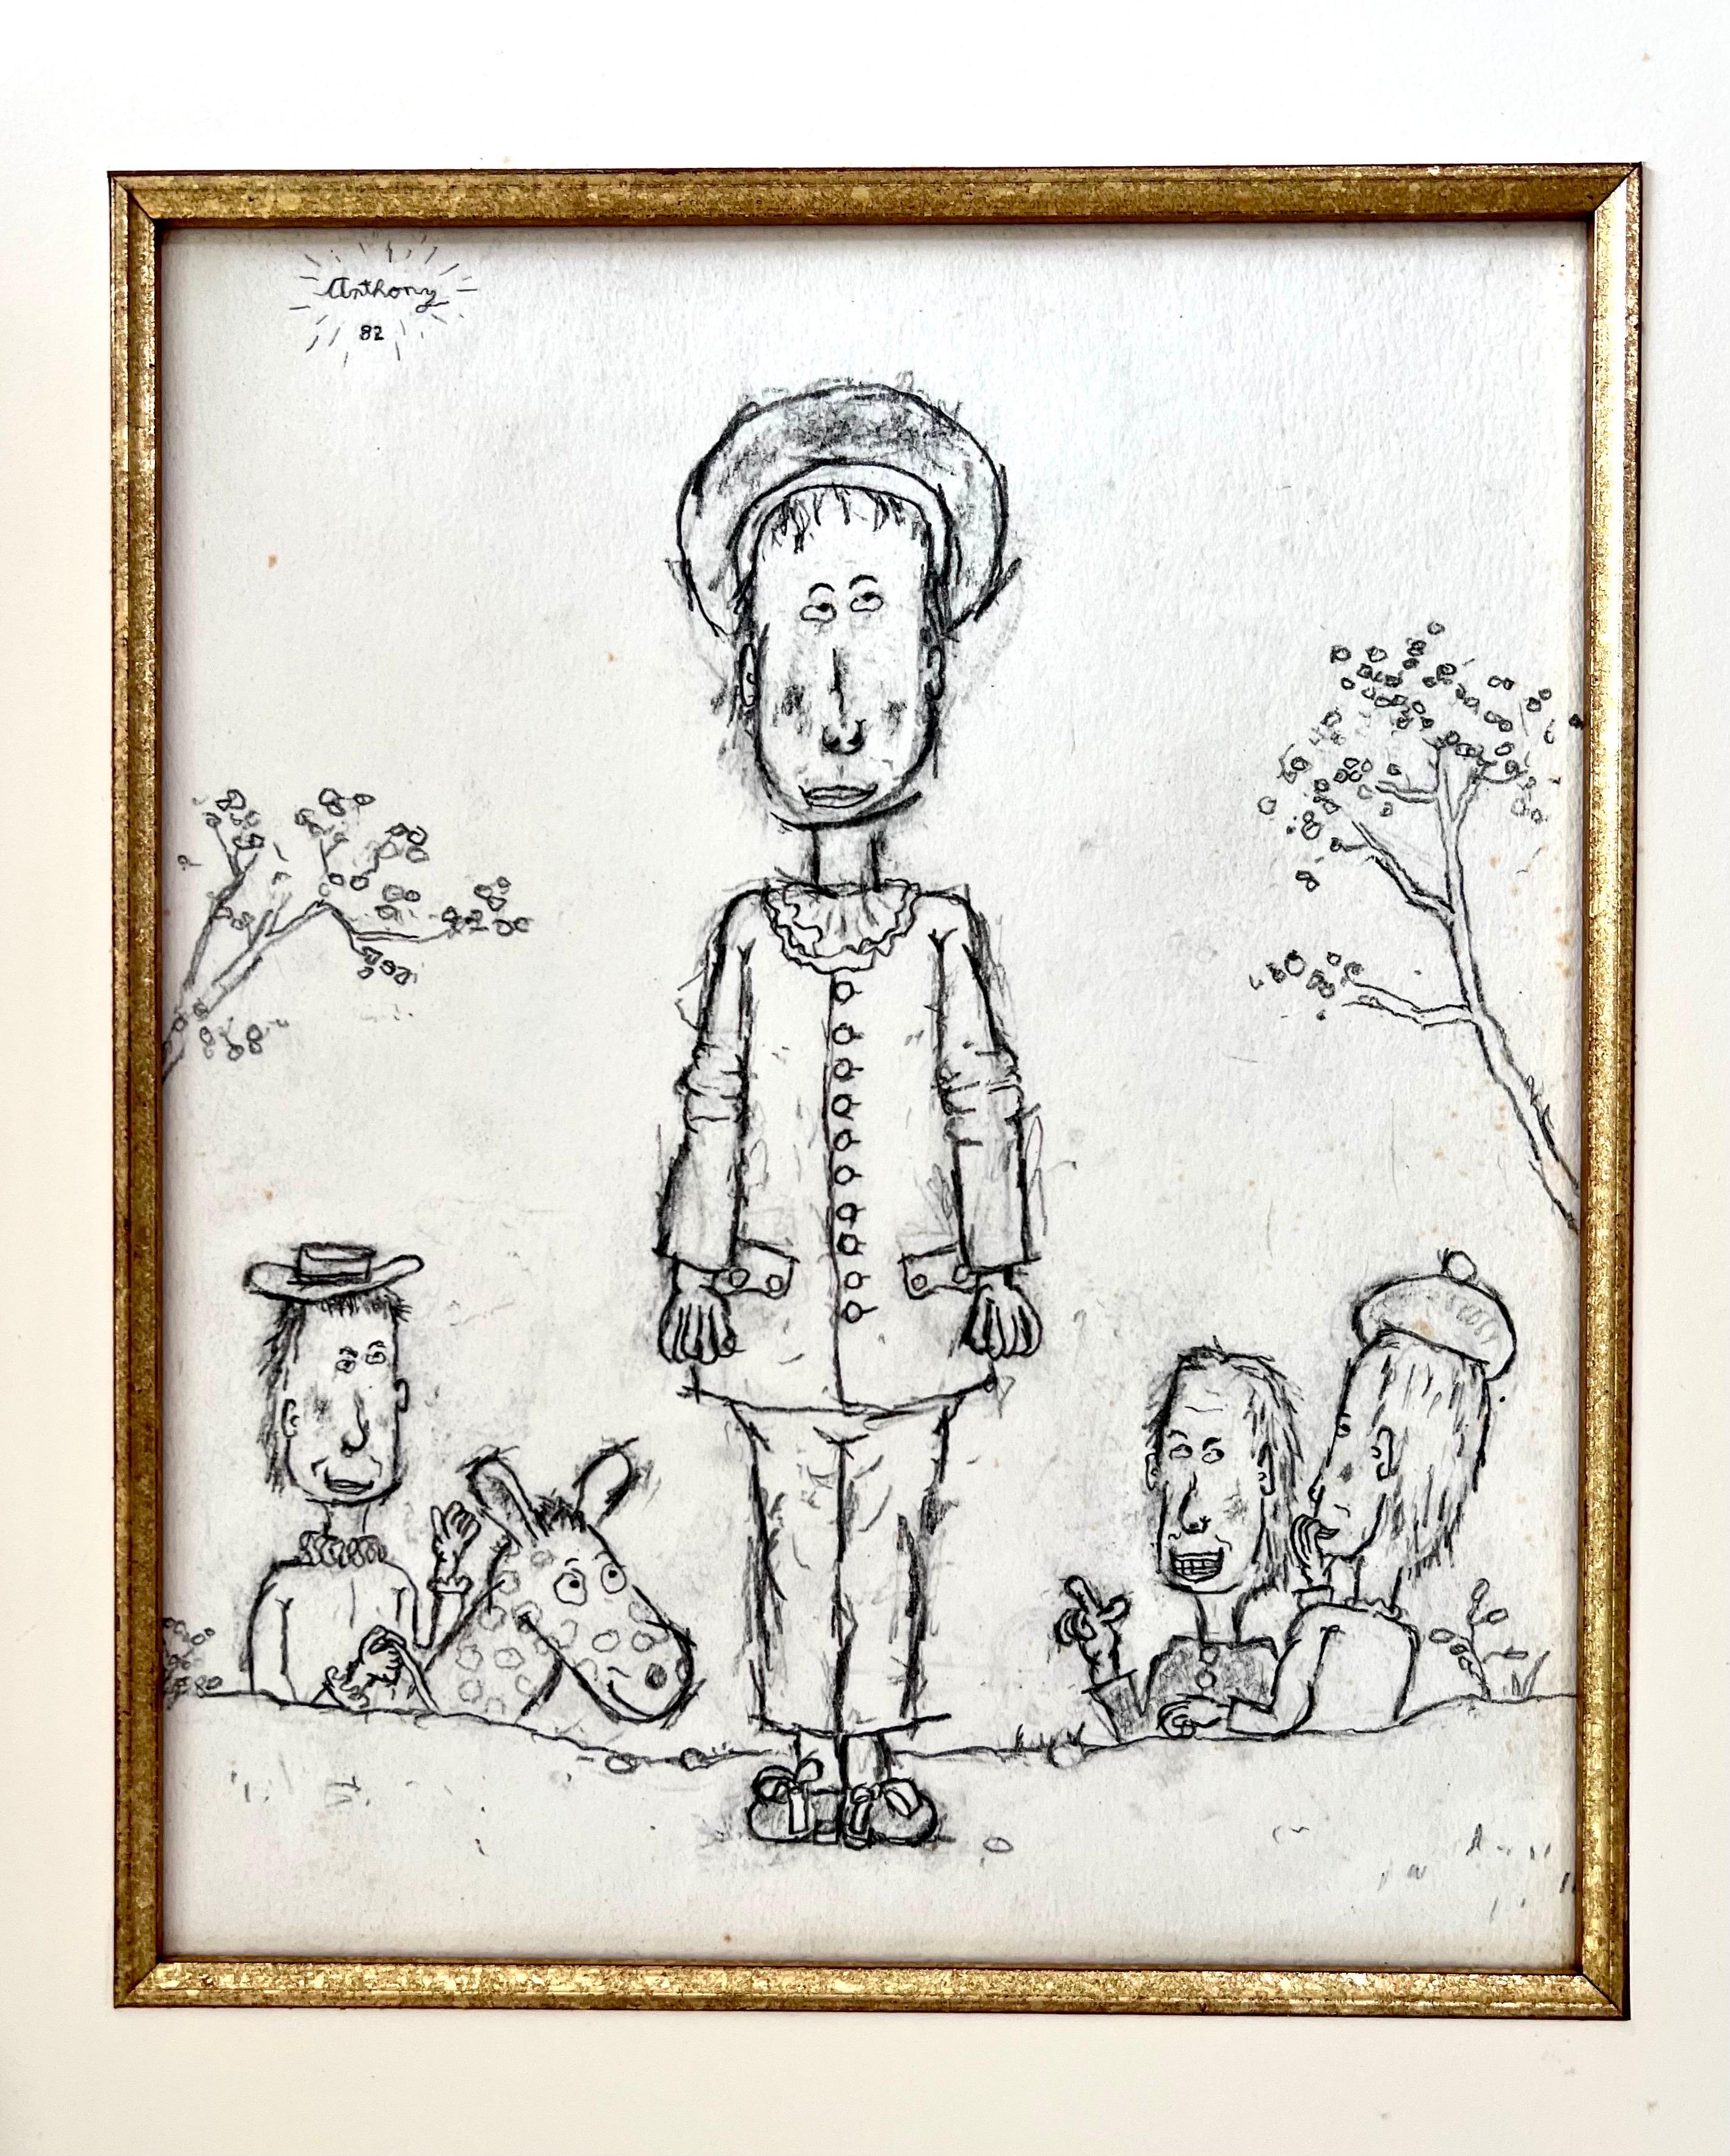 William Anthony, (1934 - 2022)
Gilles, 1982 
Matted 17 X 15 (not framed,) sheet is 9.5 X 12.5, drawing is a bit smaller.

American painter, illustrator and draftsman William Anthony was born 1934 in Fort Monmouth, New Jersey. Getting his